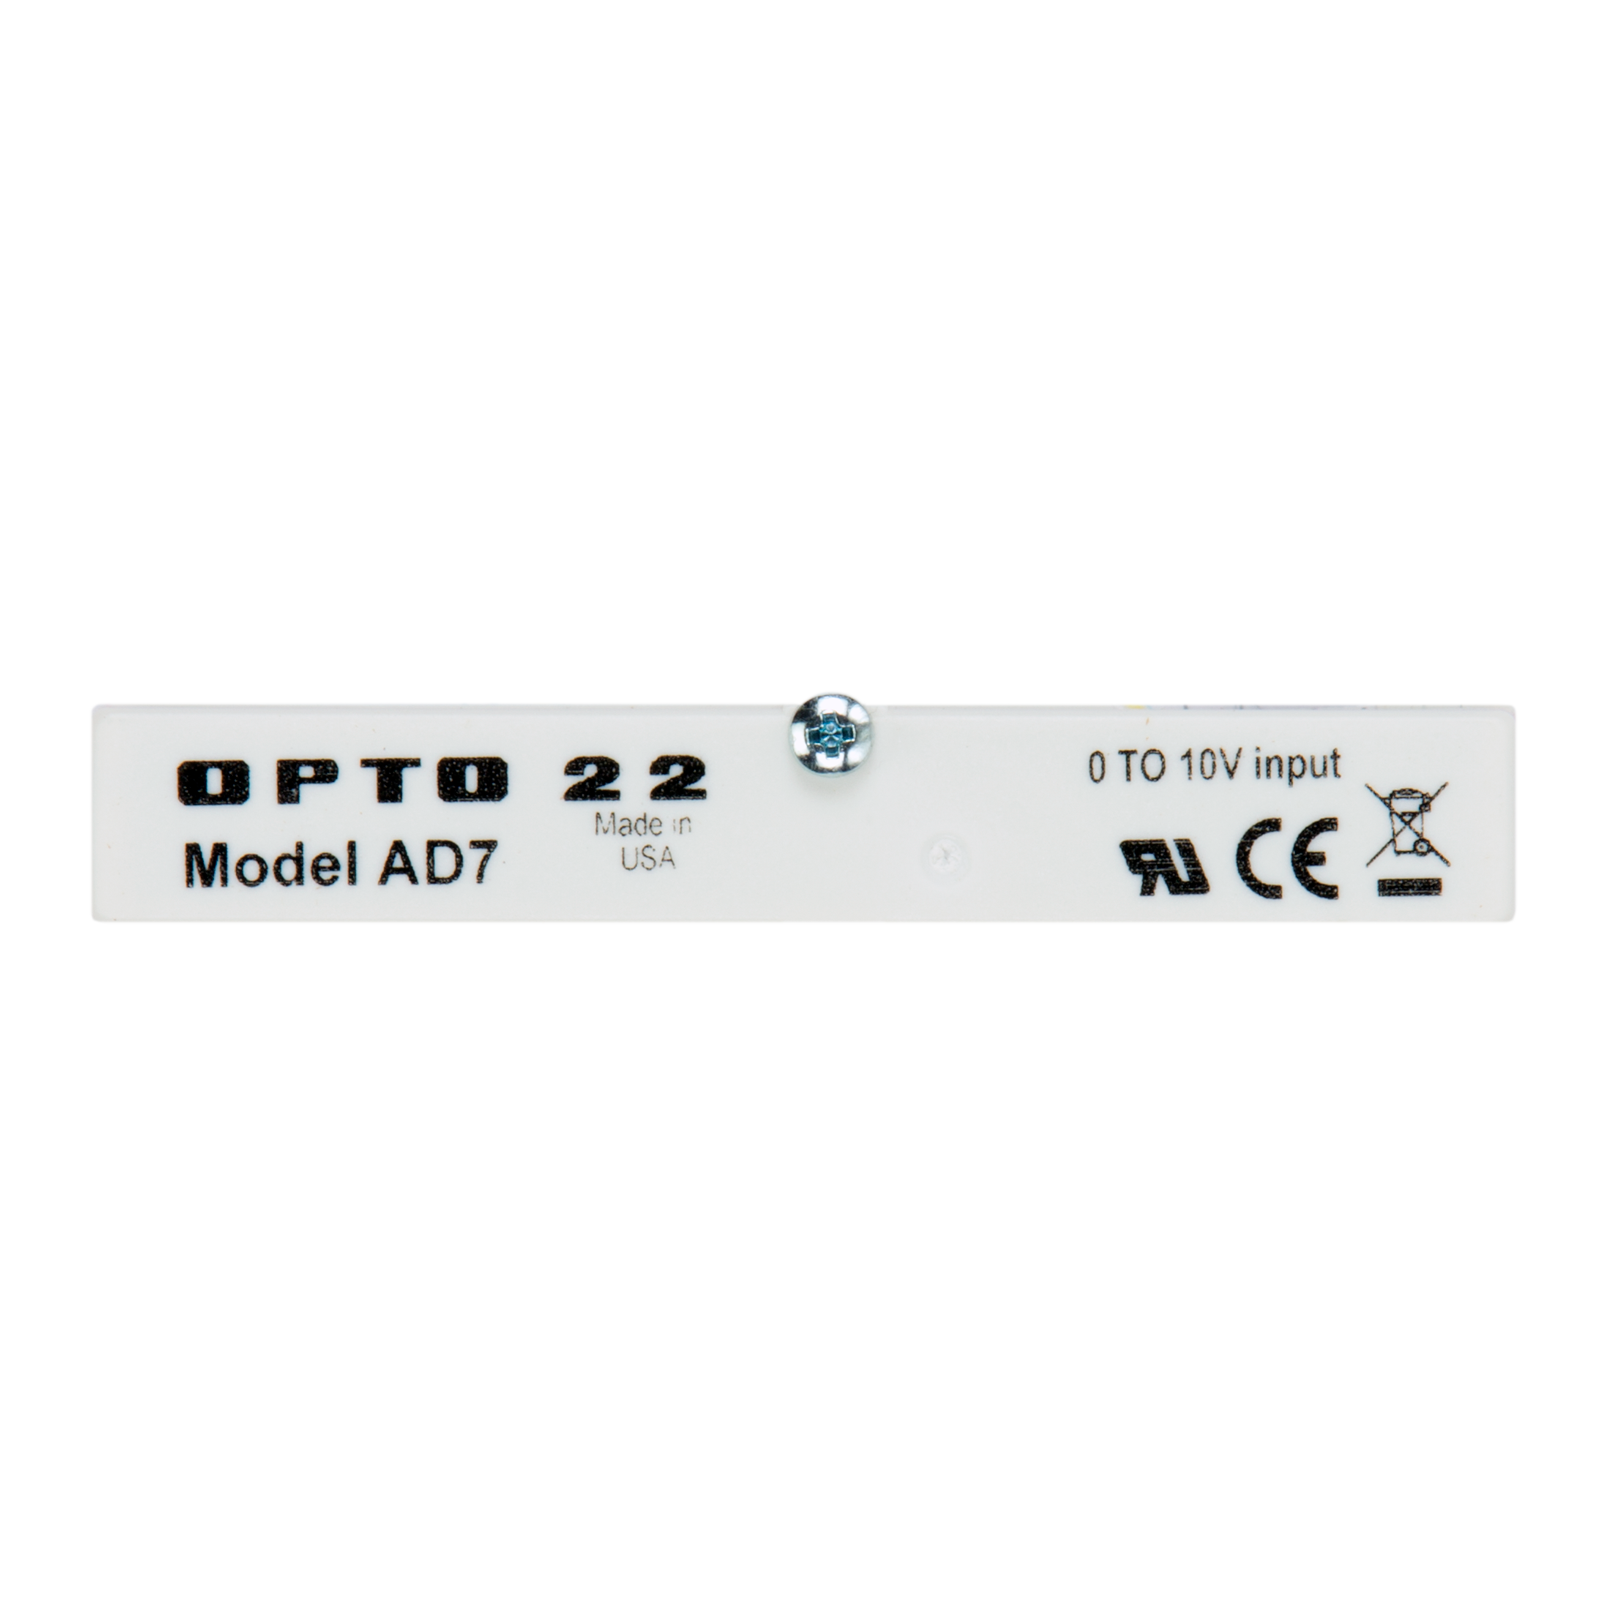 OPTO 22 AD7 0 to 10V Input Module